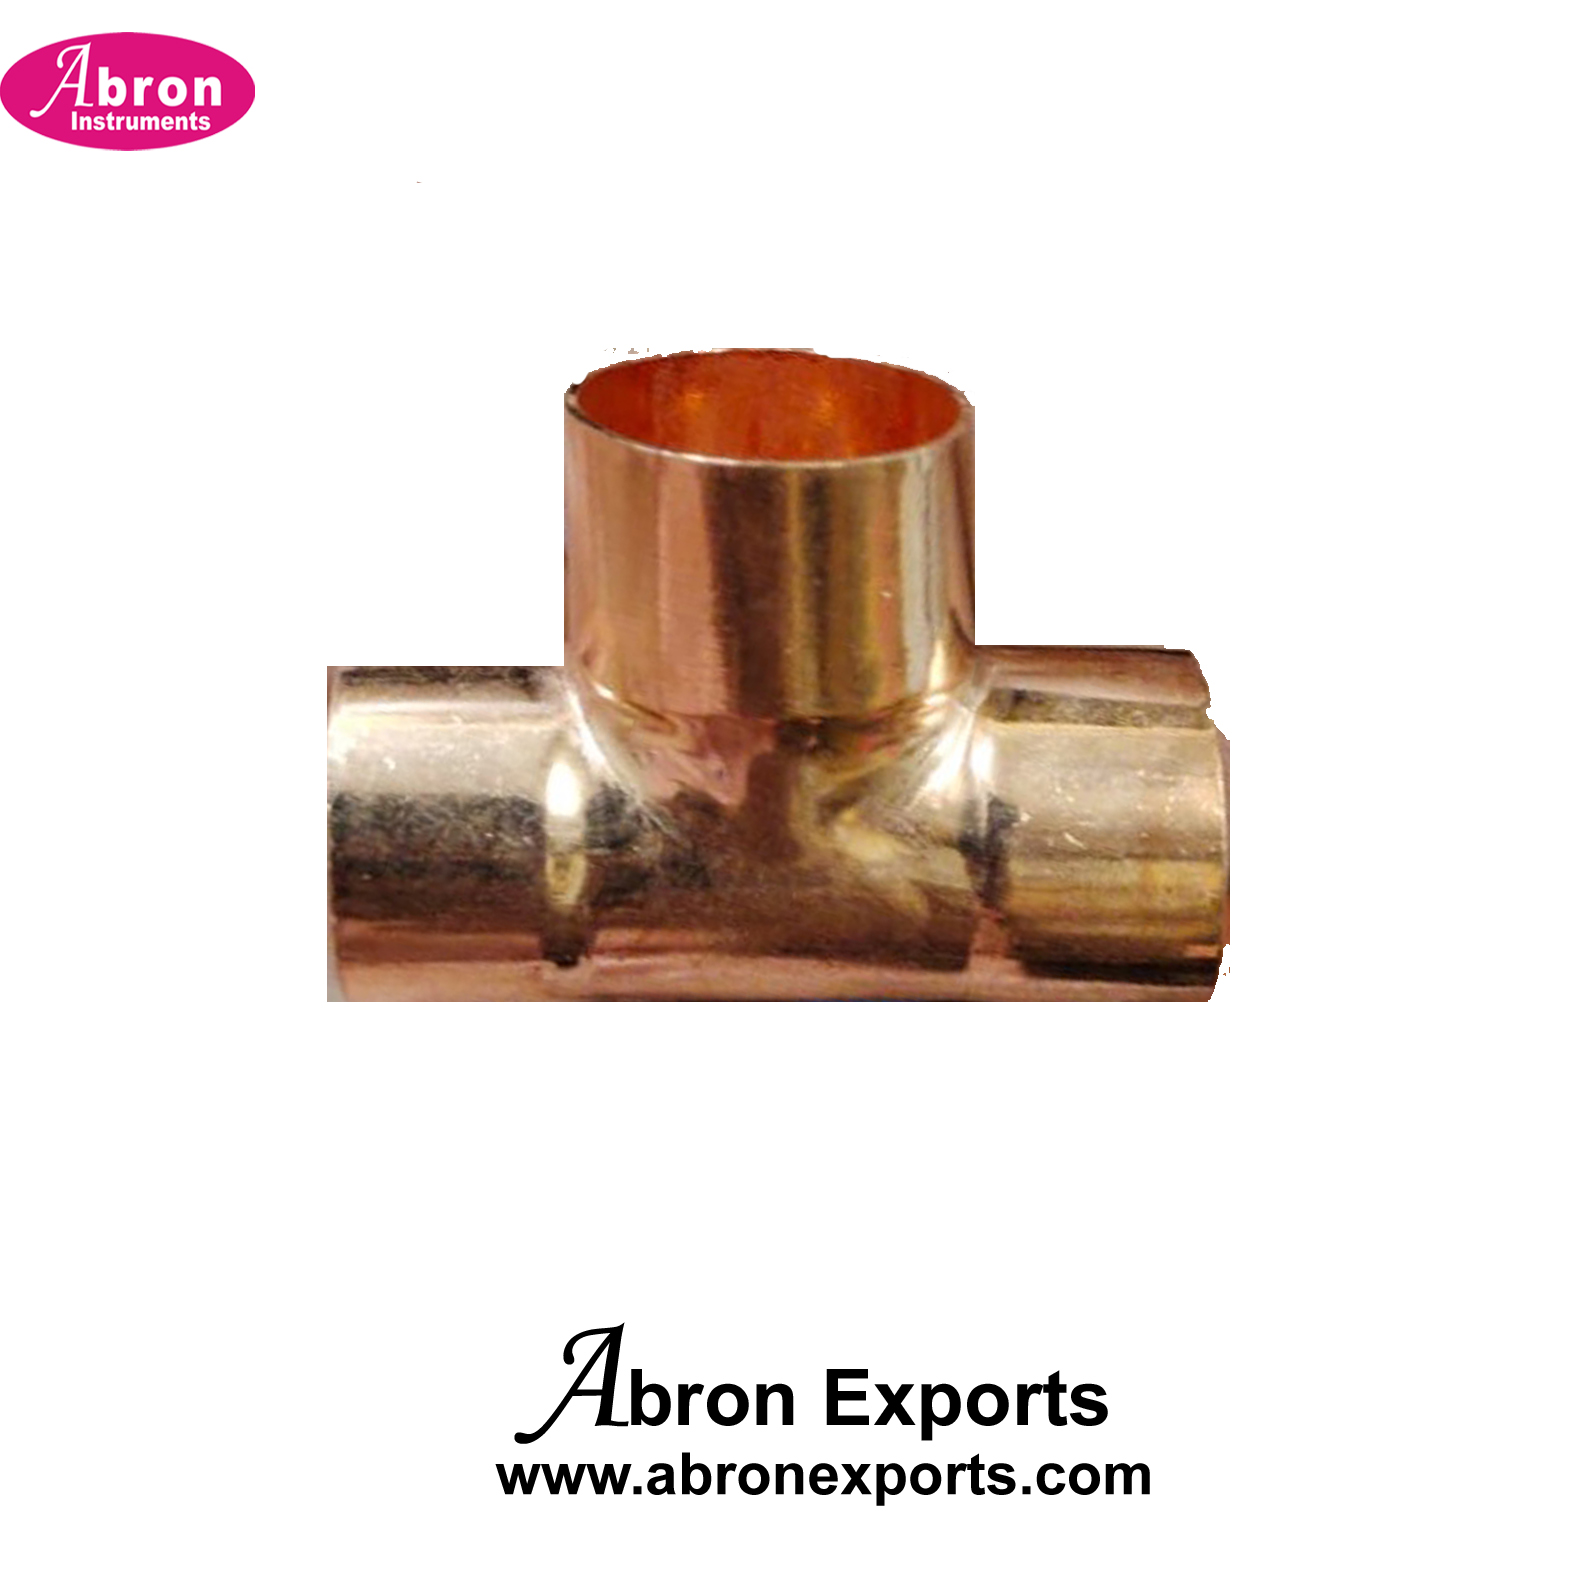 Medical gas Pipe Line spare Tee copper coupler 15mm or 22mm Pack of 100 each gas for pipeline installation Abron ABM-1121PT 